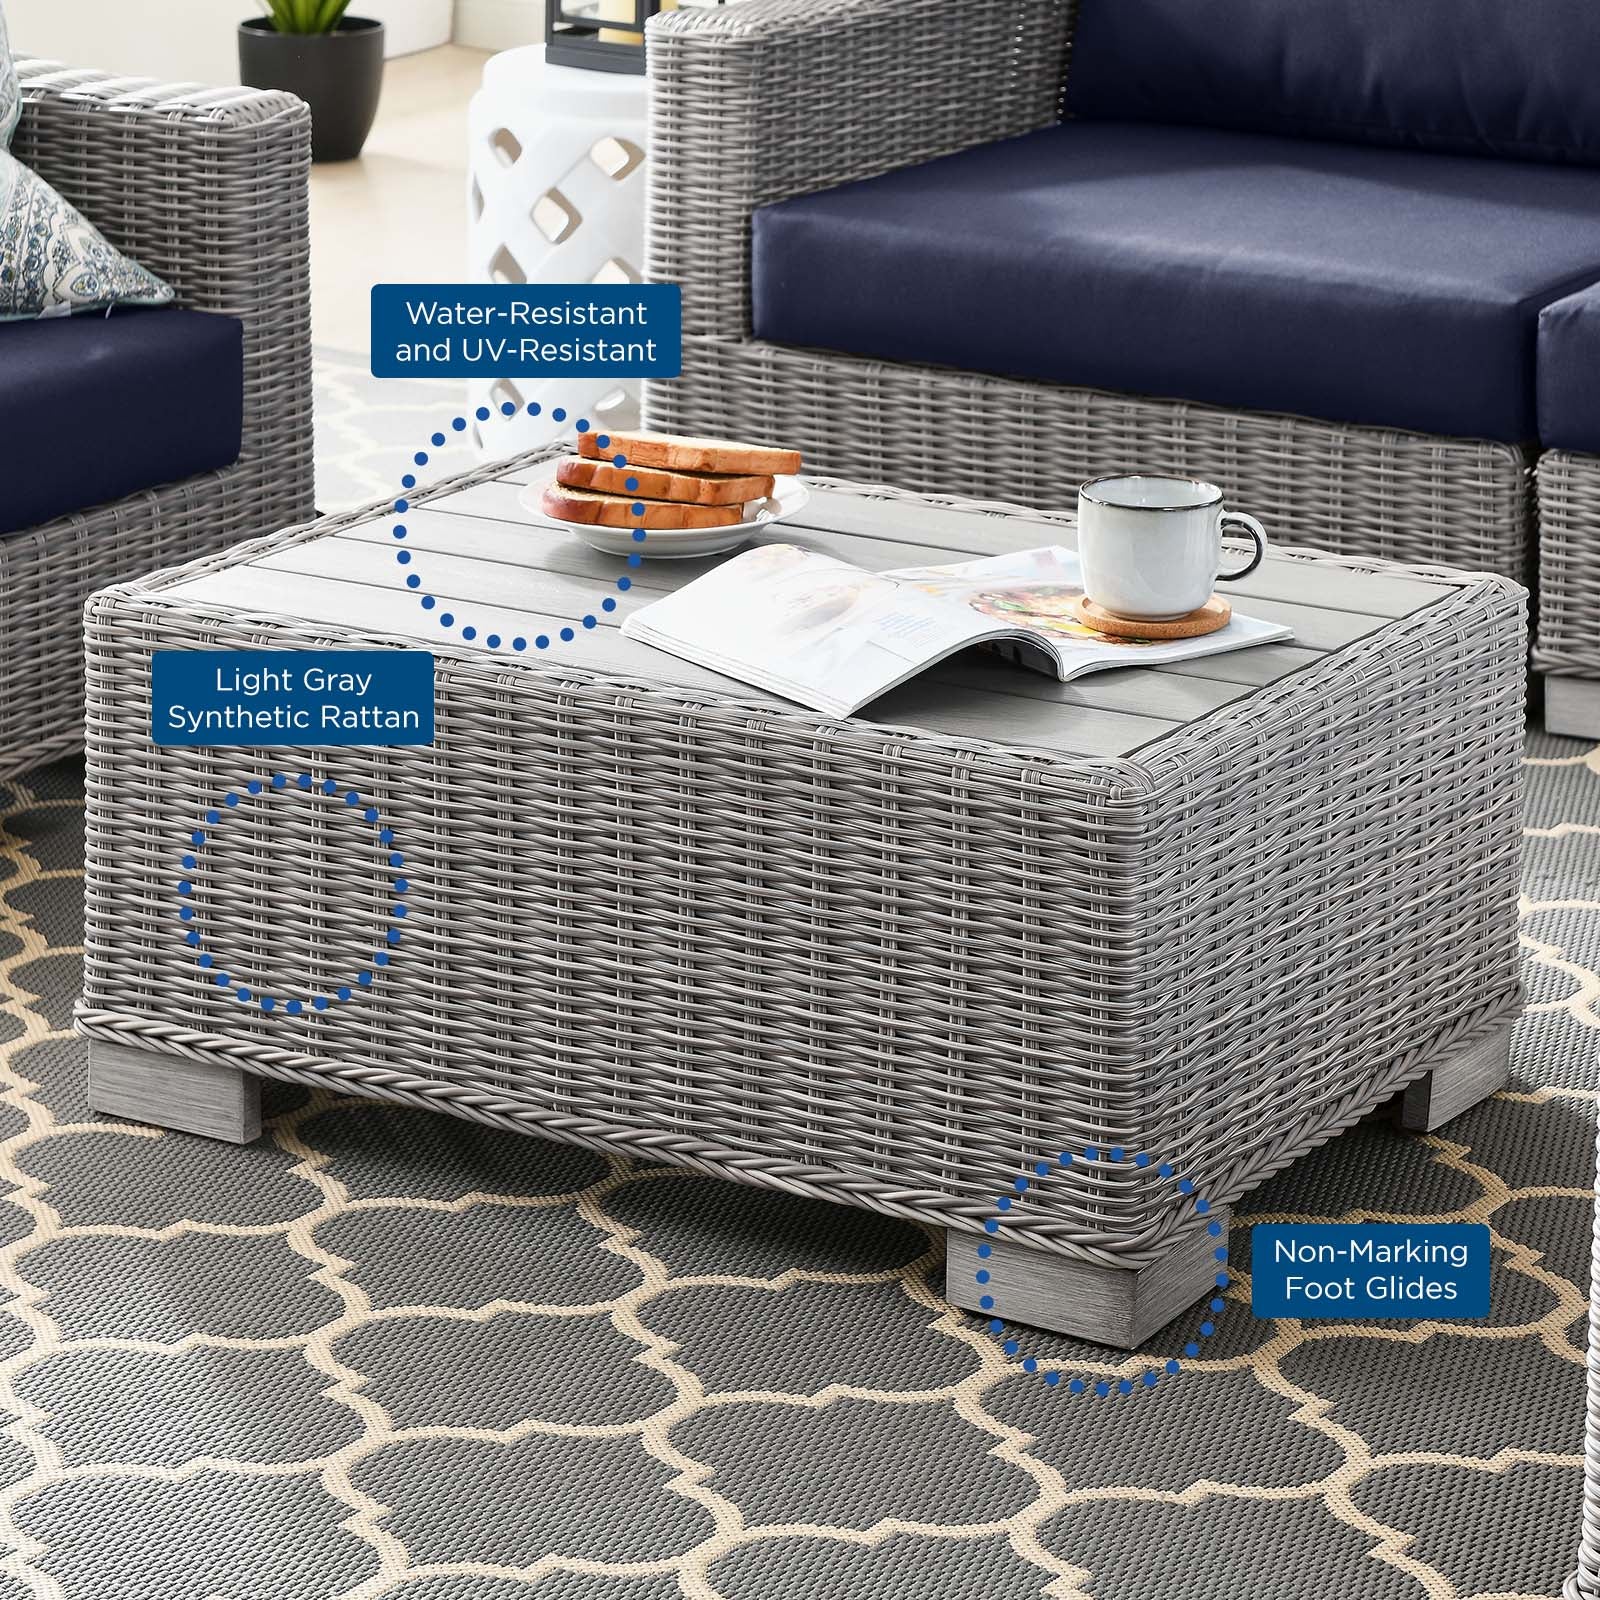 Conway 4-Piece Outdoor Patio Wicker Rattan Furniture Set - East Shore Modern Home Furnishings